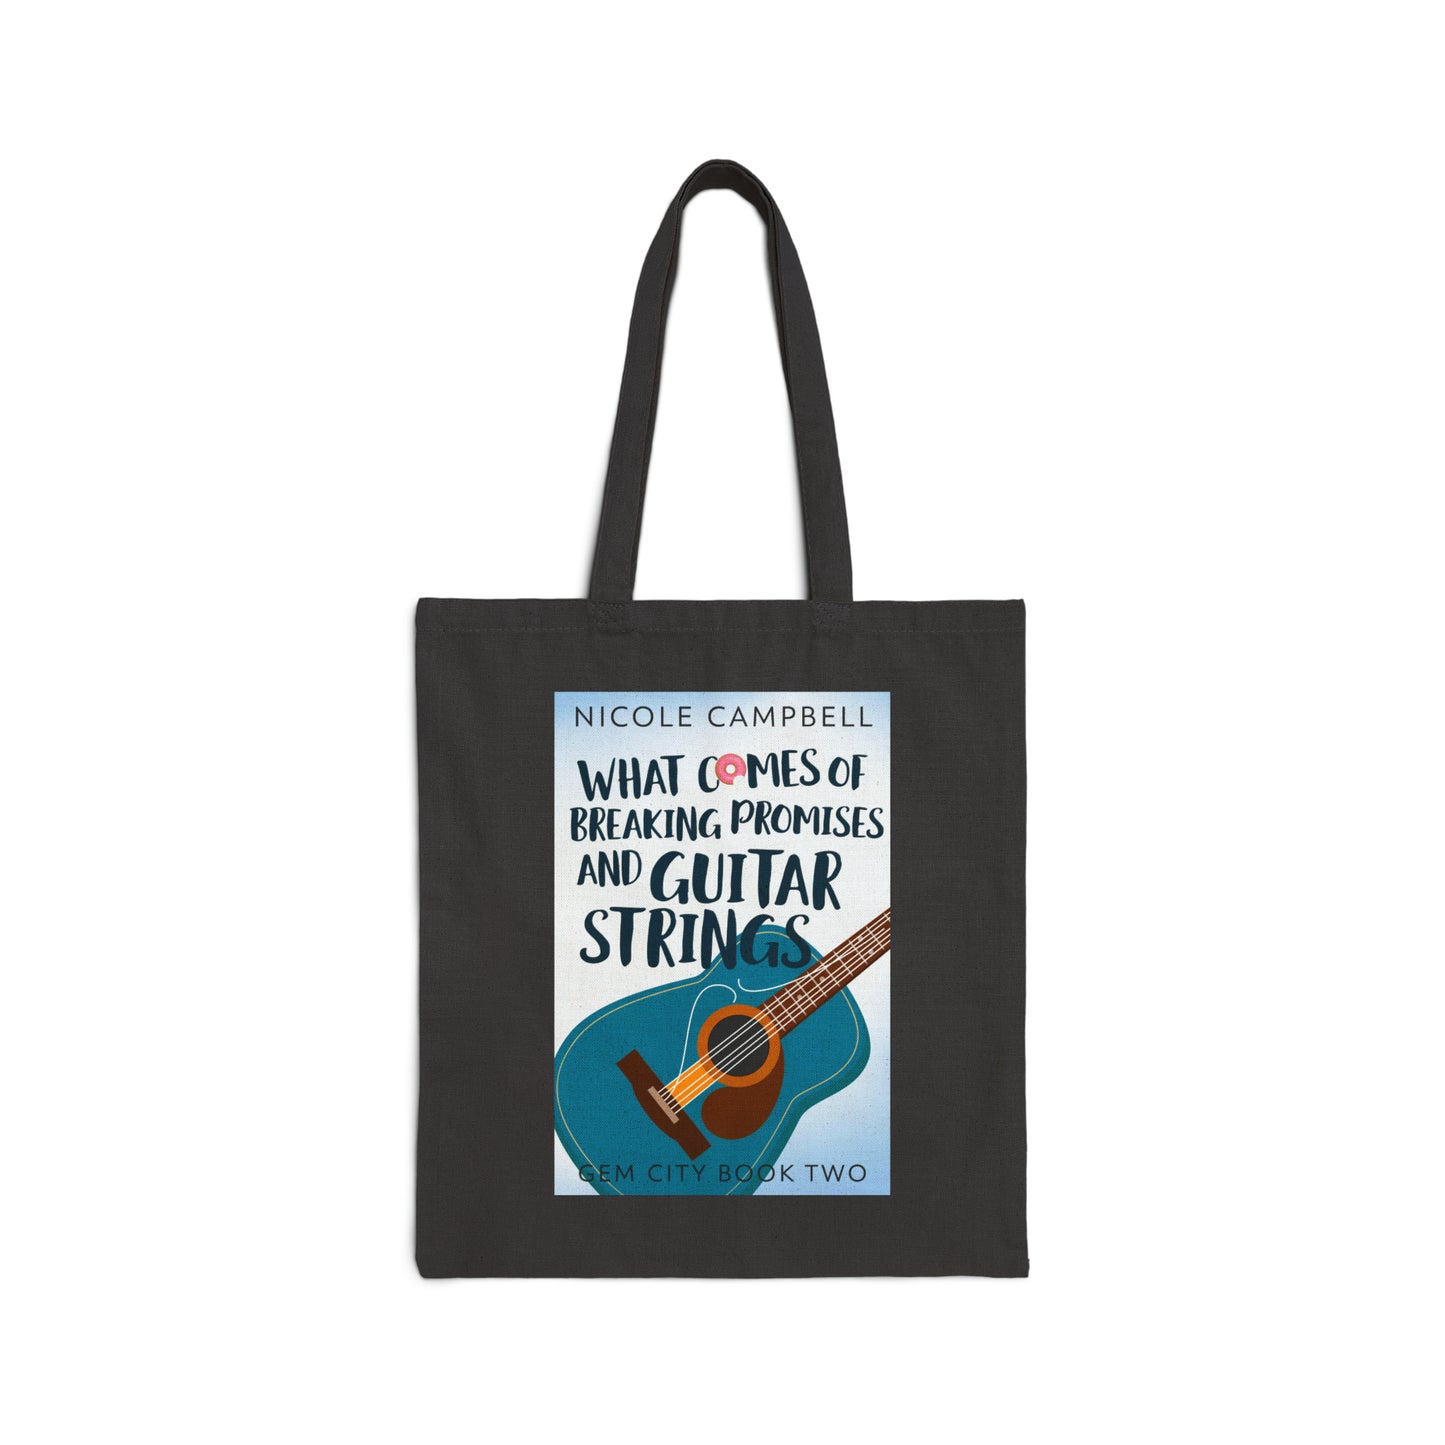 What Comes of Breaking Promises and Guitar Strings - Cotton Canvas Tote Bag